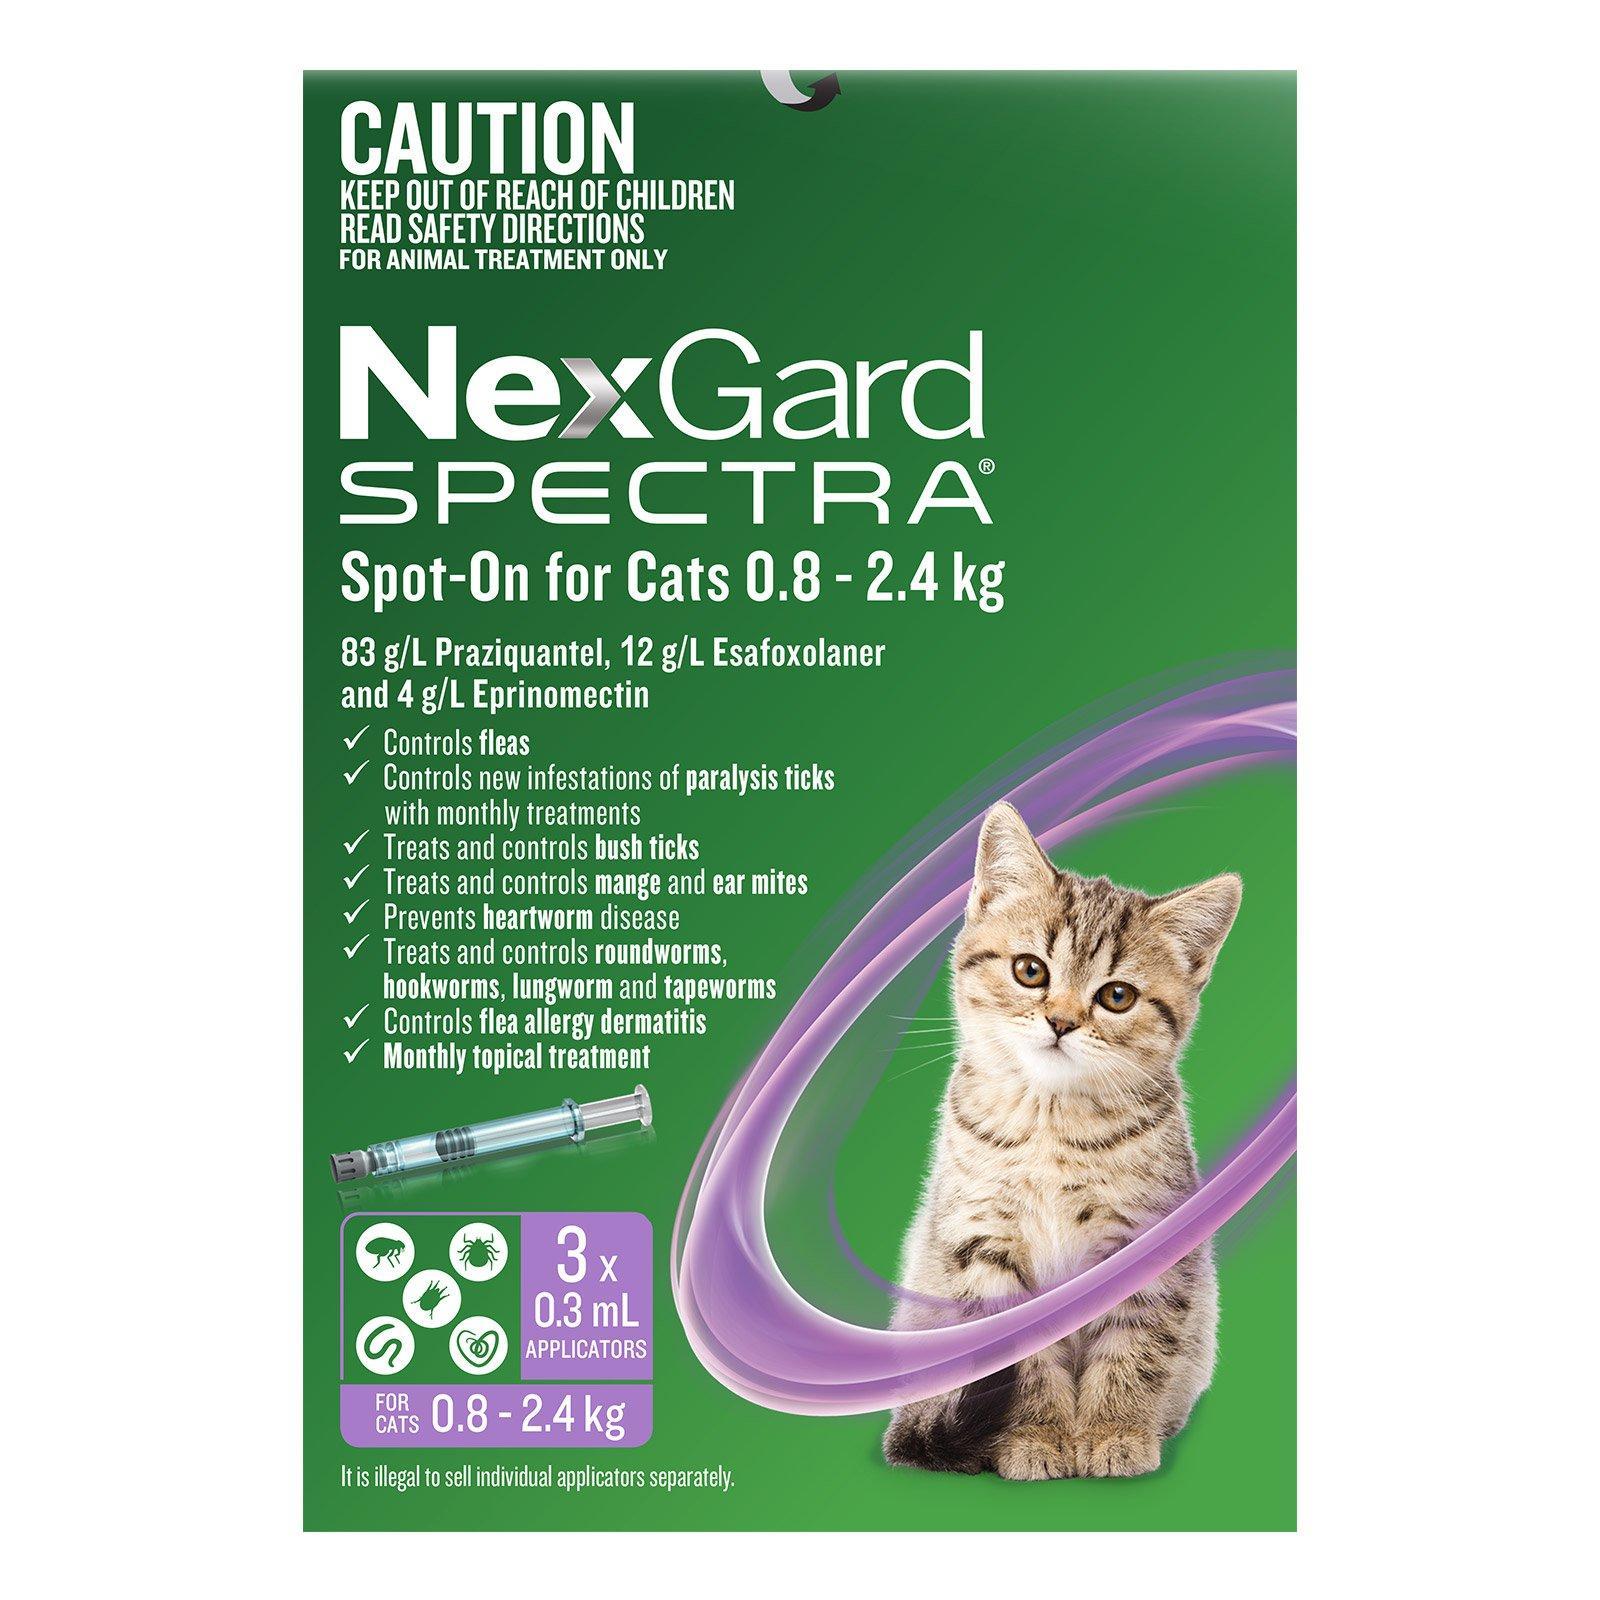 Nexgard Spectra Flea,Tick, Worm and Heartworm Prevention for Kittens and Small Cats 0.8 to 2.4 Kg Purple Pack 3 Pipettes